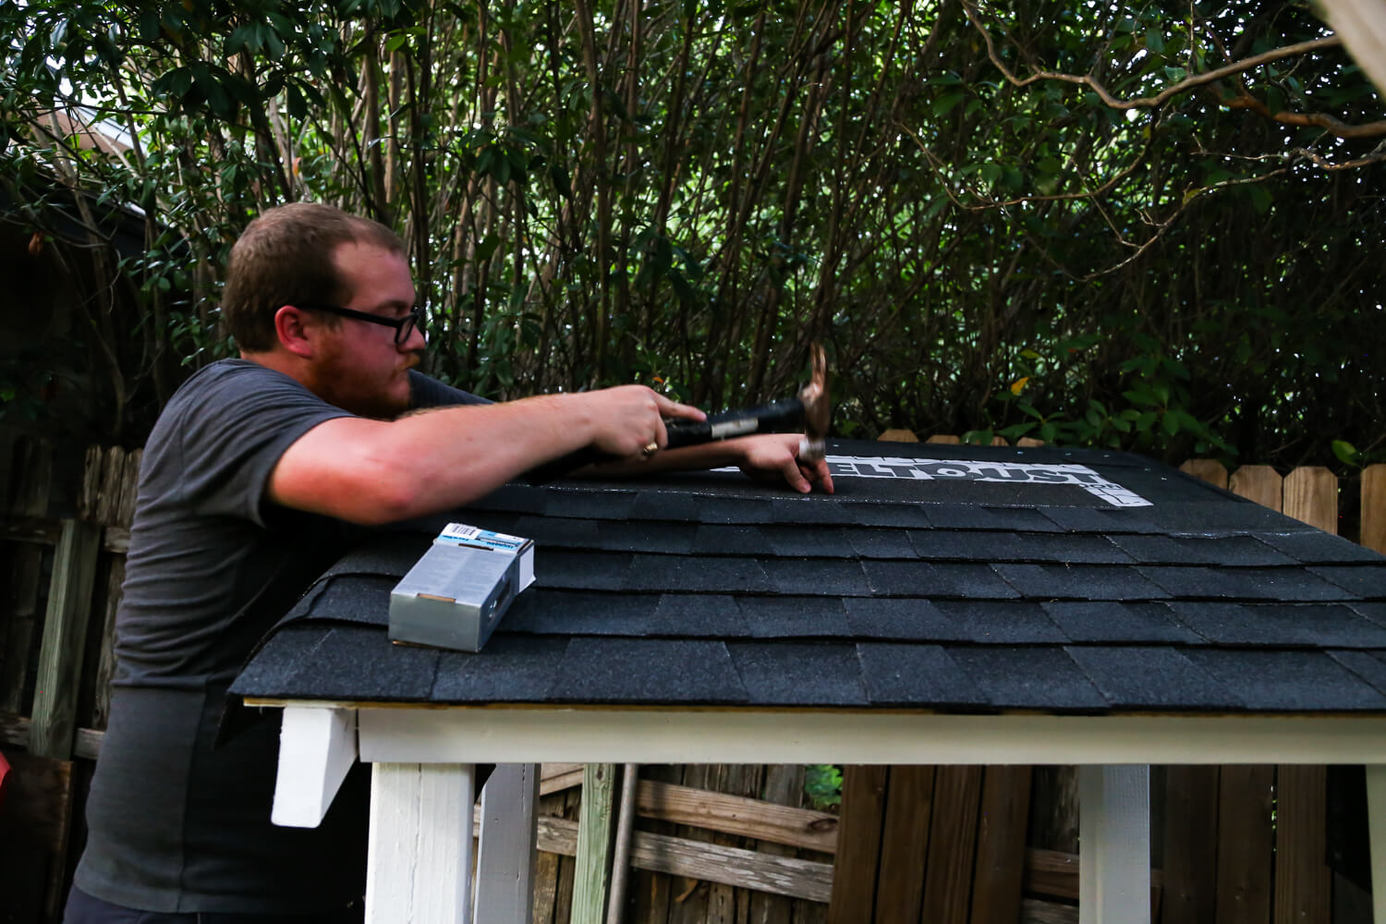 DIY installing shingles on a playhouse roof